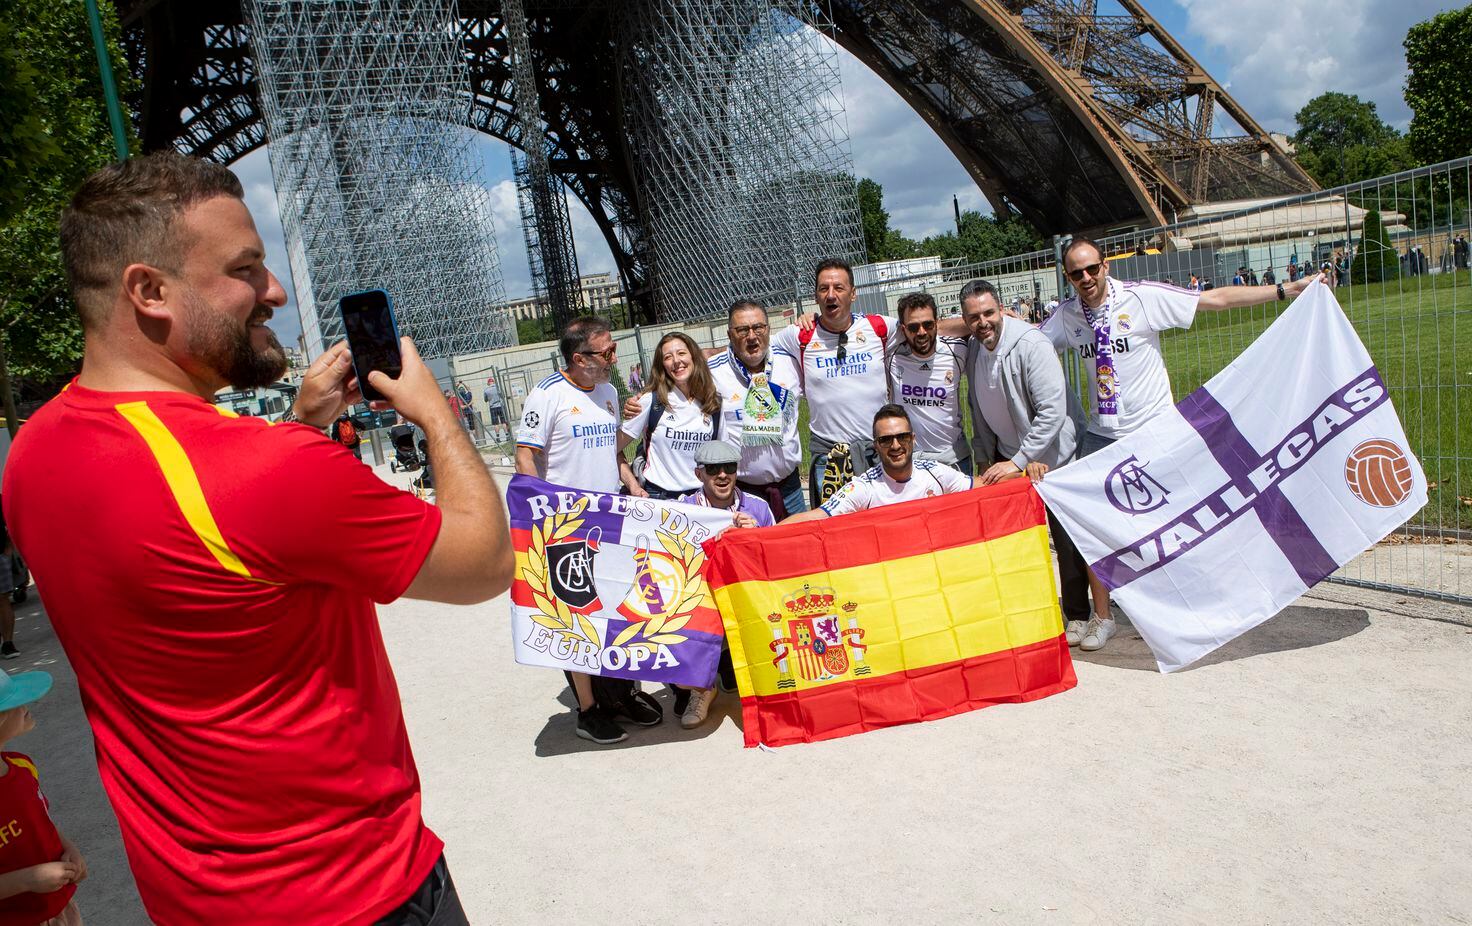 Real Madrid fans pose for photographs by the Eiffel Tower ahead of the Champions League final in Paris.